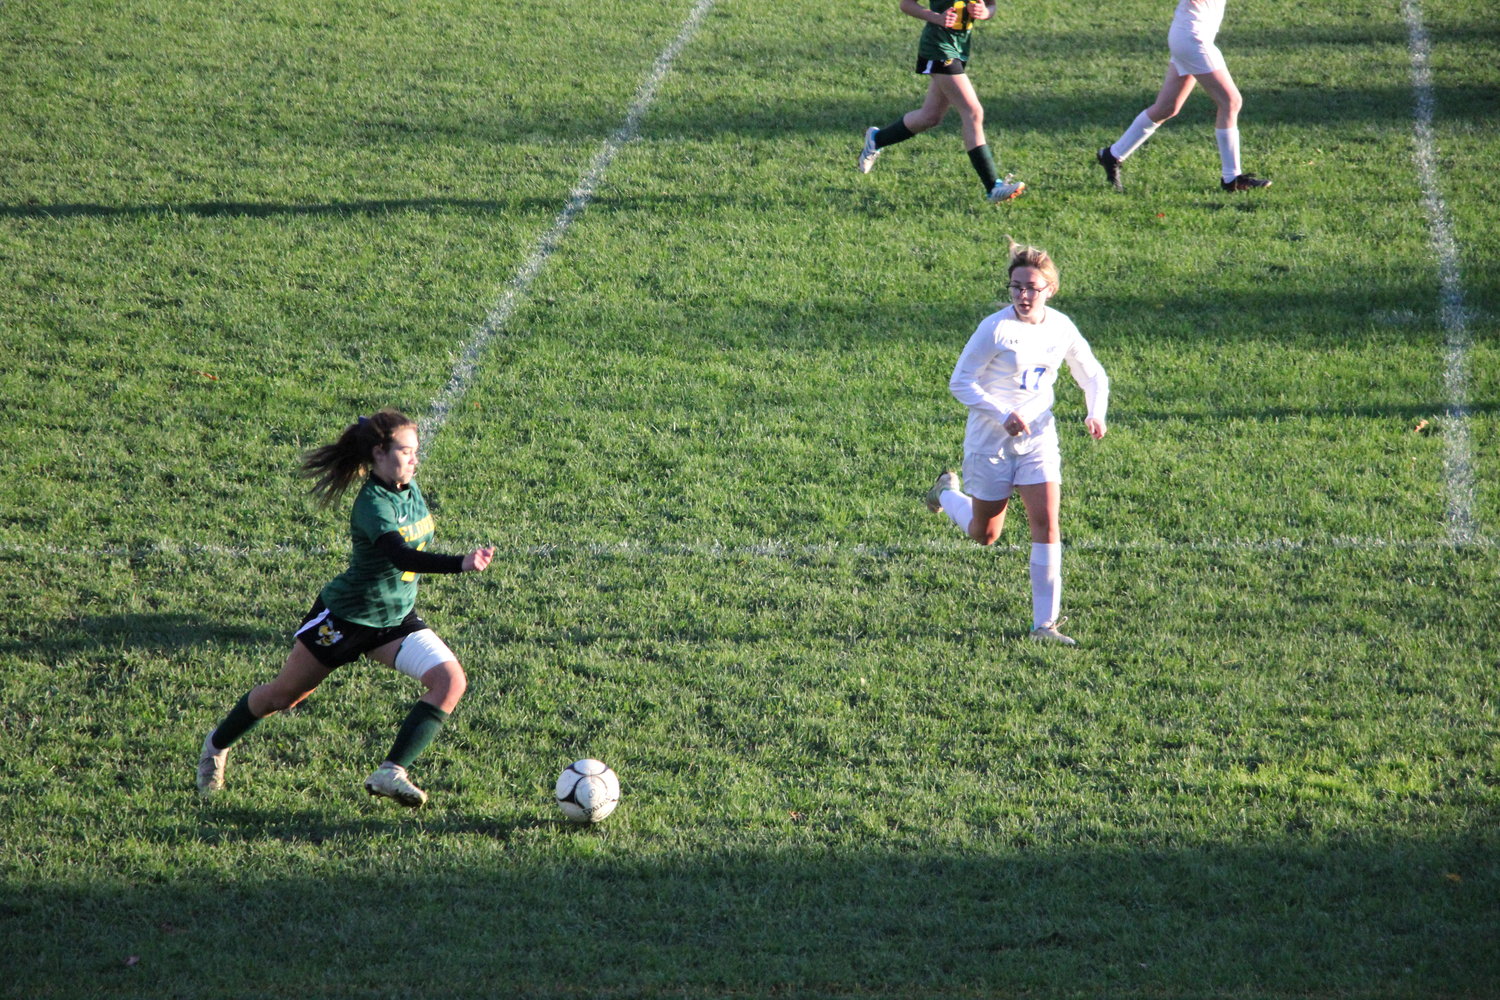 Jailyn Labuda scored twice for the Lady Yellowjackets in a non-league victory over Monticello.